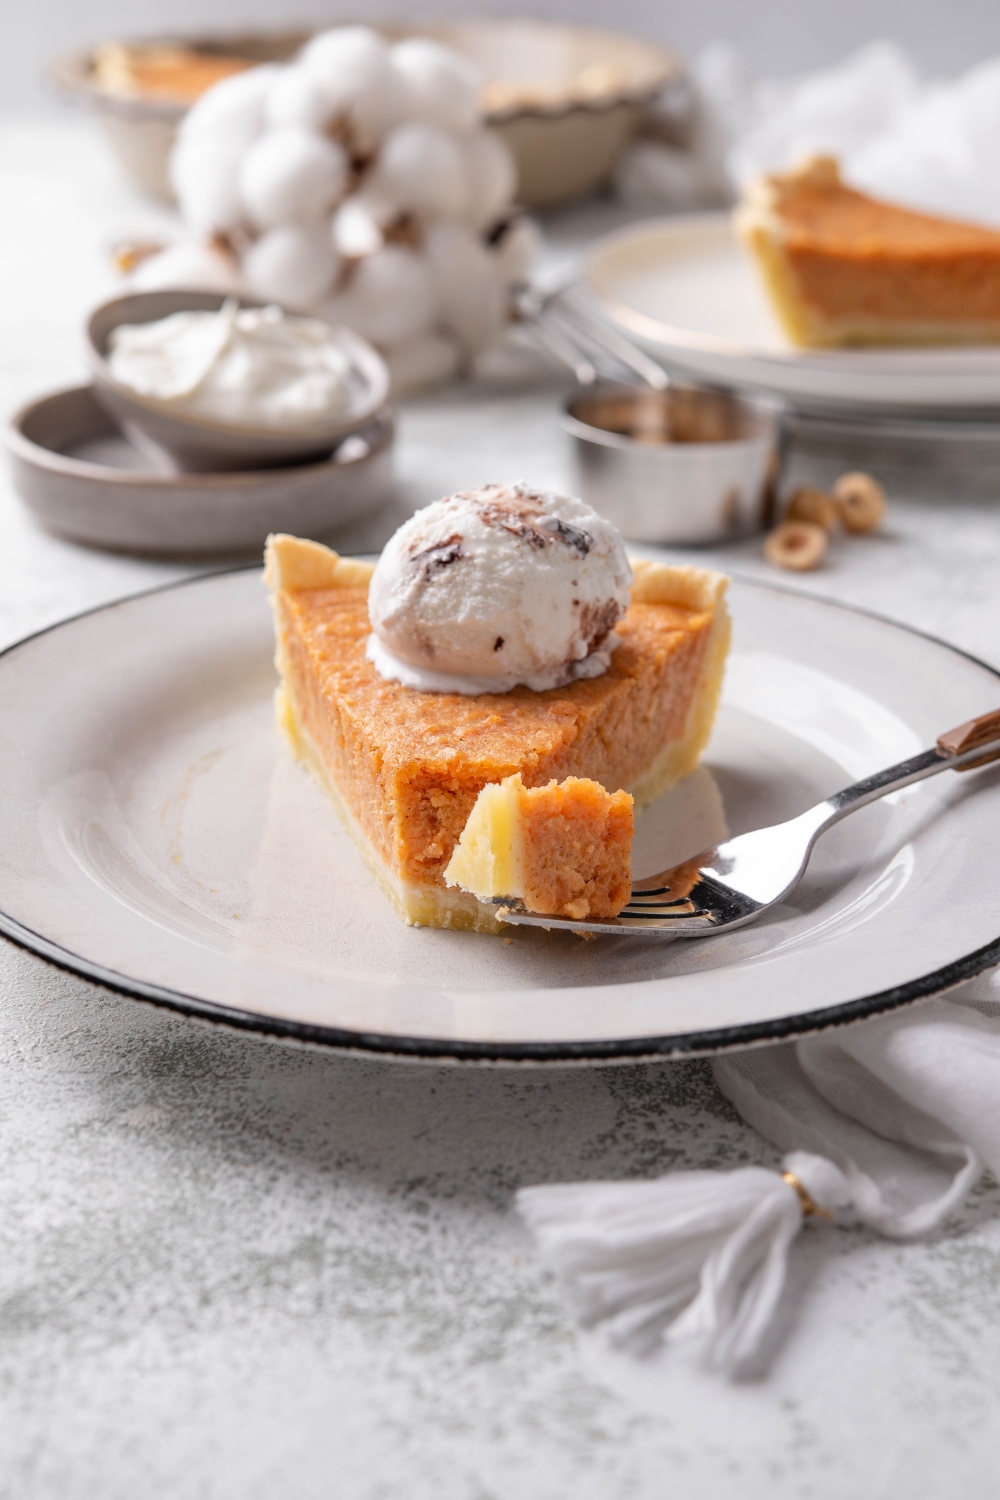 A slice of sweet potato pie topped with whipped cream with a bite missing and a fork is next to the pie slice holding the missing bite.